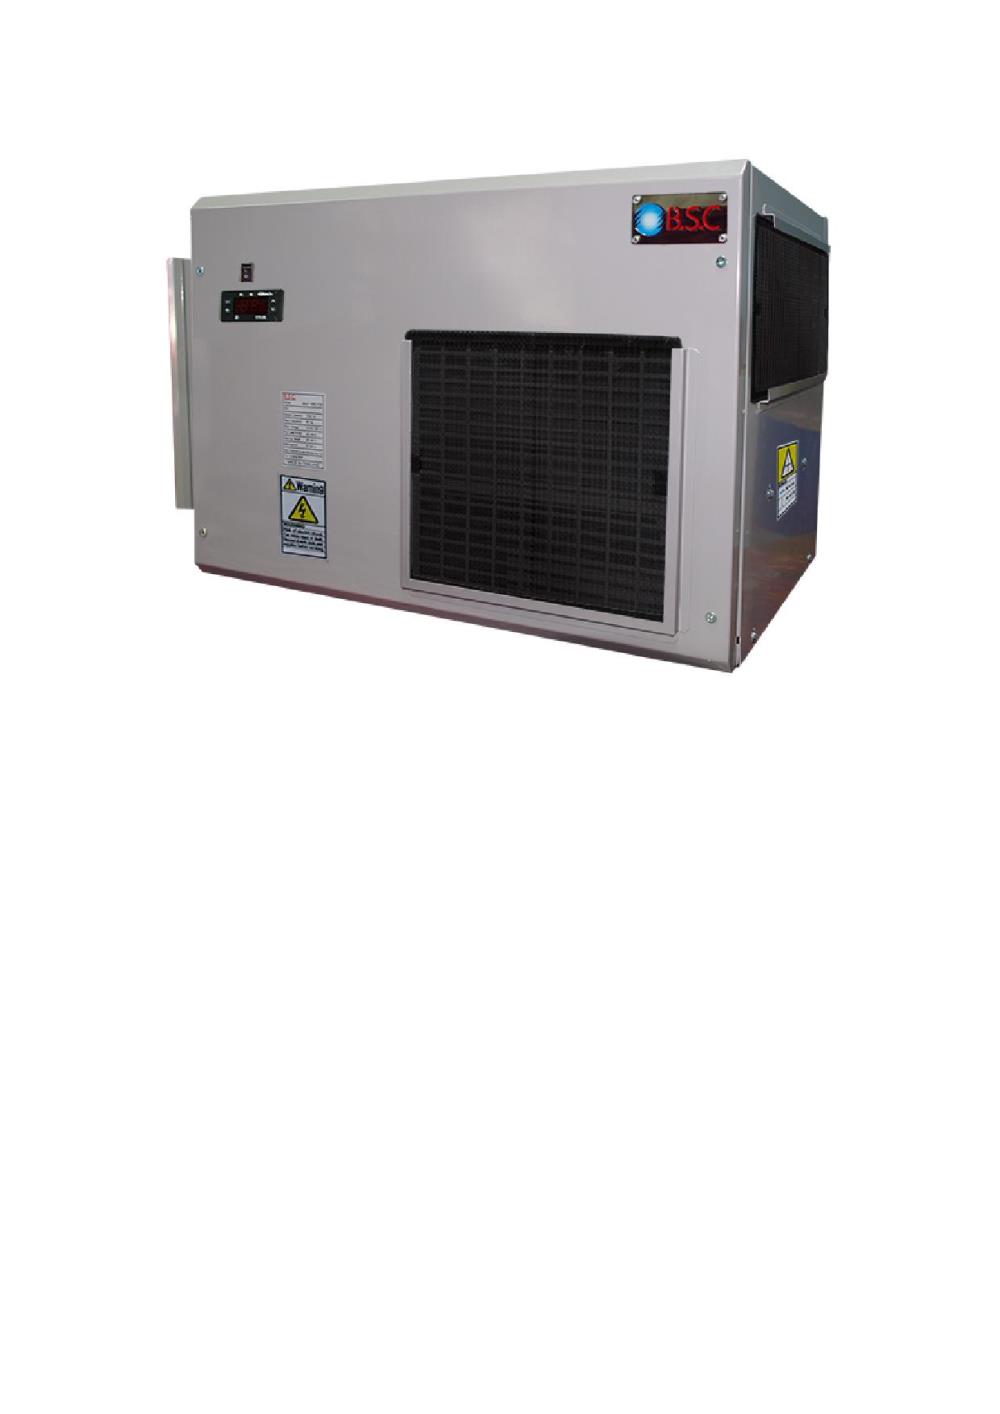 Air Condition : BSC1550-TOP,แอร์ตู้คอนโทรล,BSC,Plant and Facility Equipment/HVAC/Air Conditioning